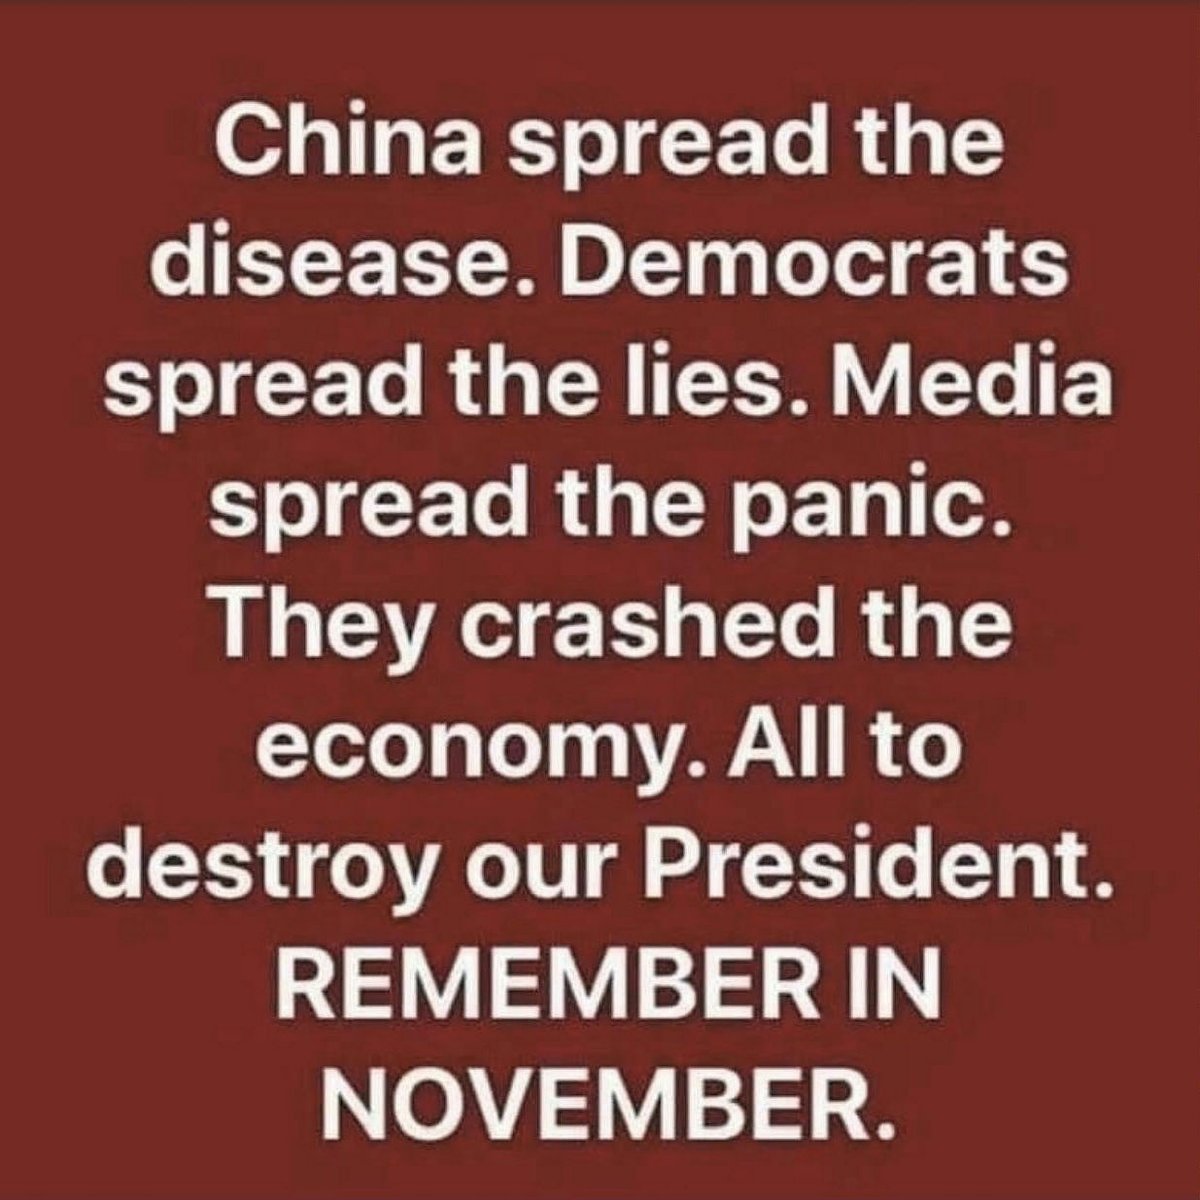 The DNC & MSM aided & abetted a CHINESE BIOWEAPON ATTACK UPON AMERICA.. Where are the PROSECUTIONS? @realDonaldTrump @VP @WarNuse @MissILmom @PCats007 @classybass3 @fuji_forever @6831Bryan @GenFlynn @DMcduffin @FreedomRings210 @DrNealHouston @Gibson4NYS @ChrisLoesch